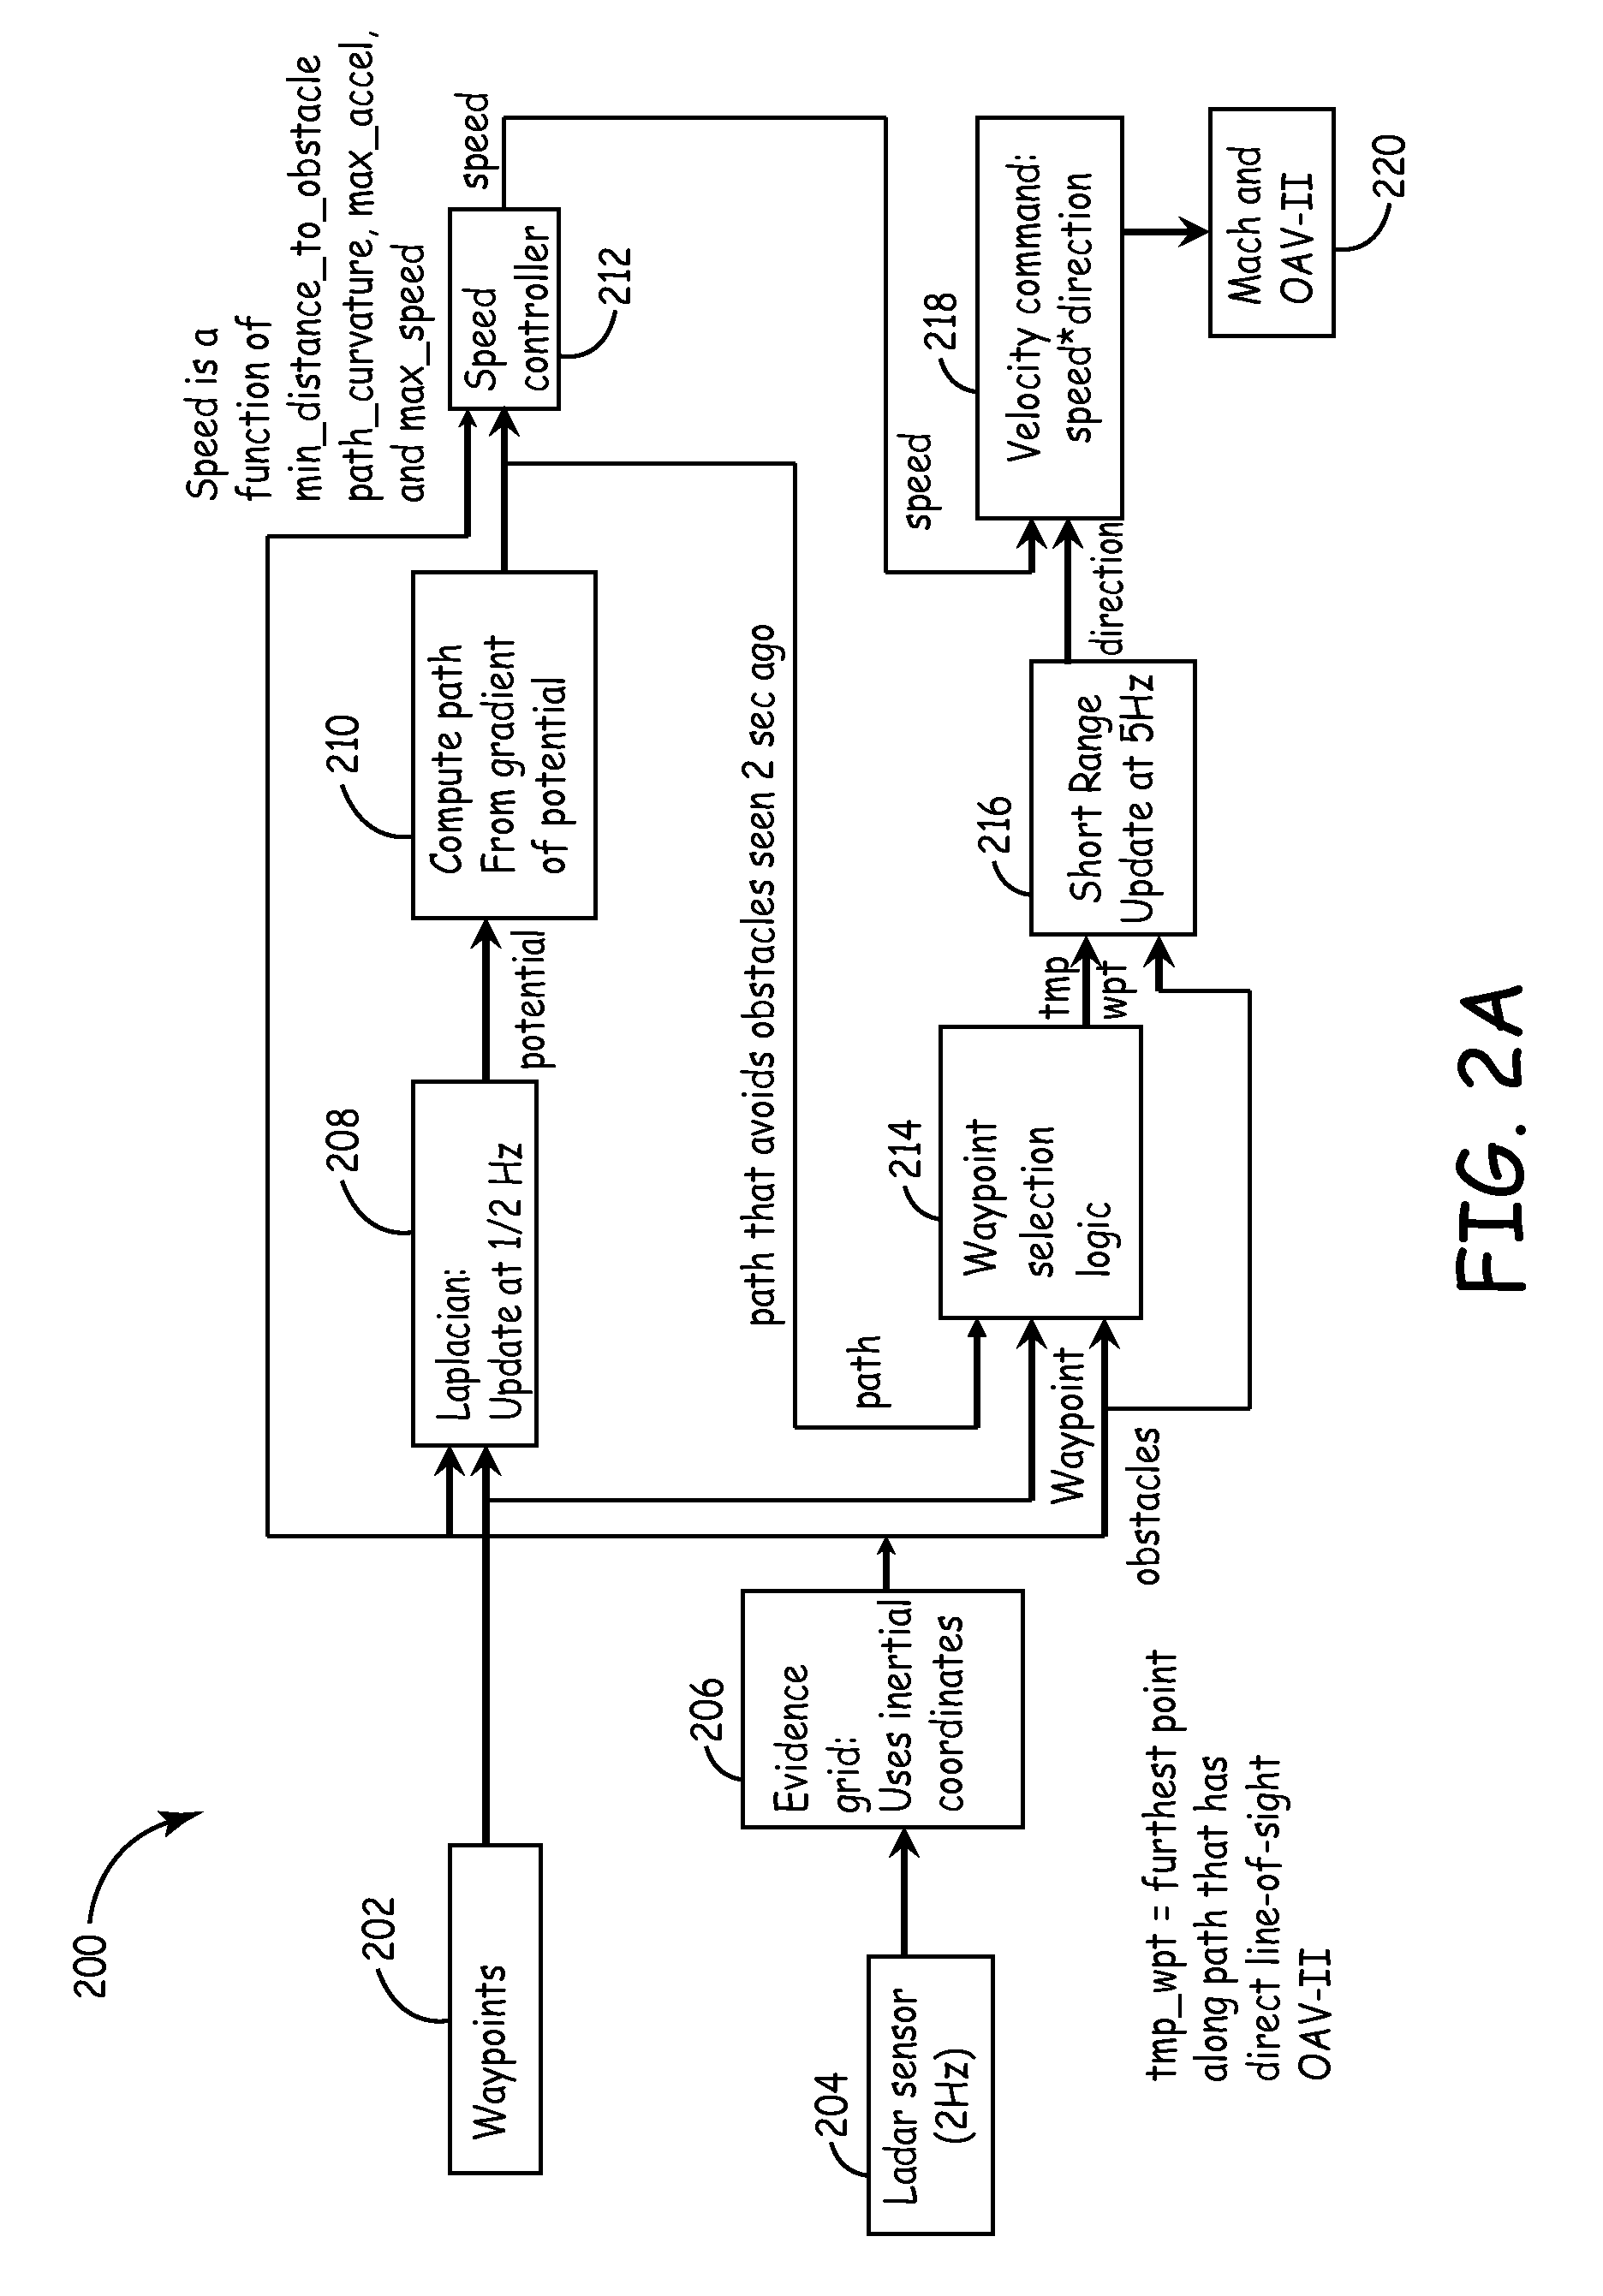 Method and system for automatic path planning and obstacle/collision avoidance of autonomous vehicles